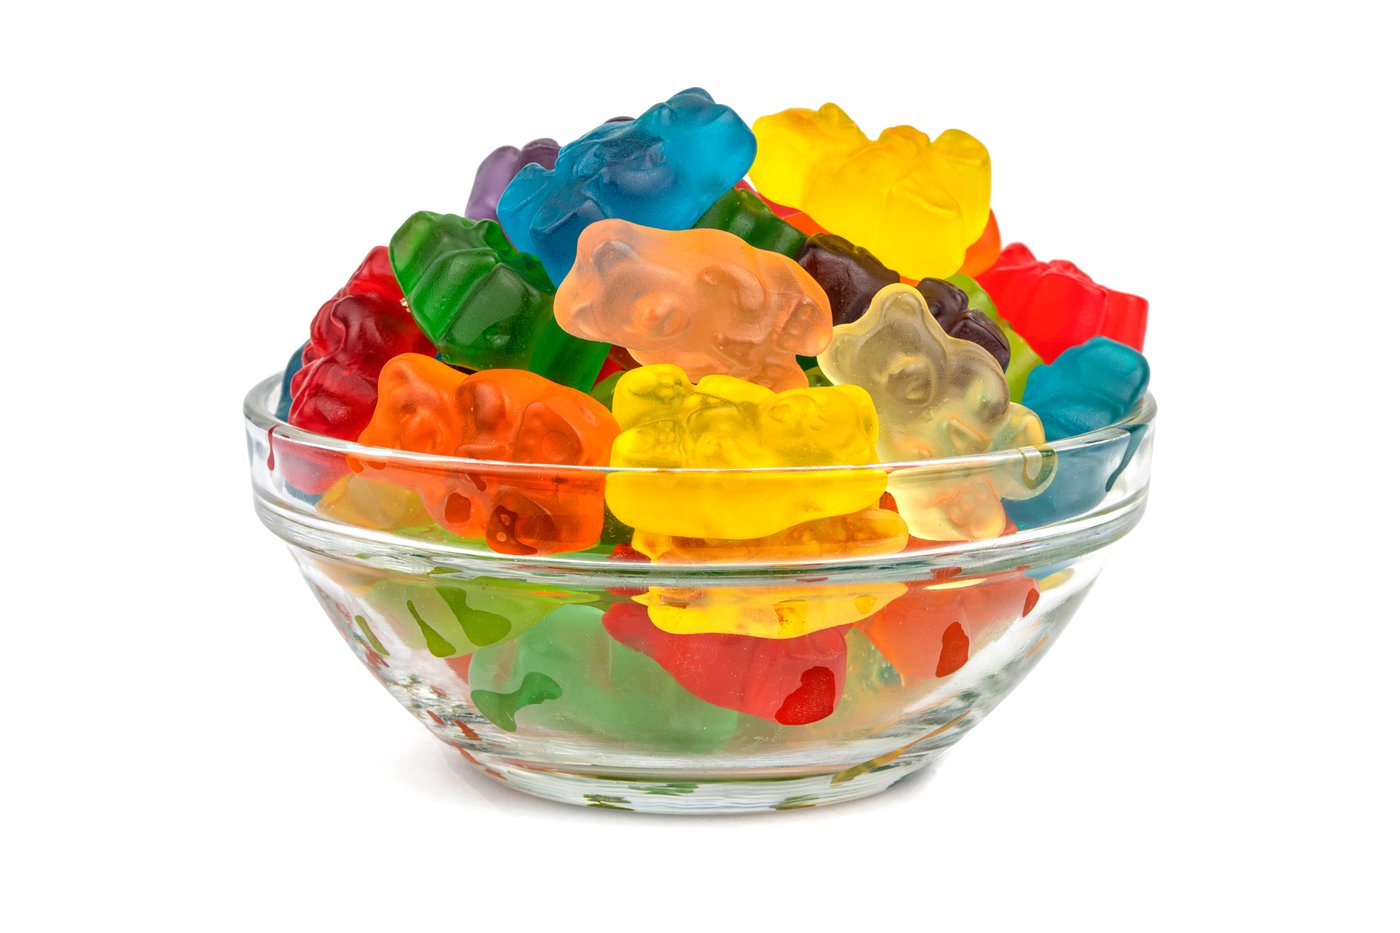 Gummy Bears (12 Flavors) By the Pound